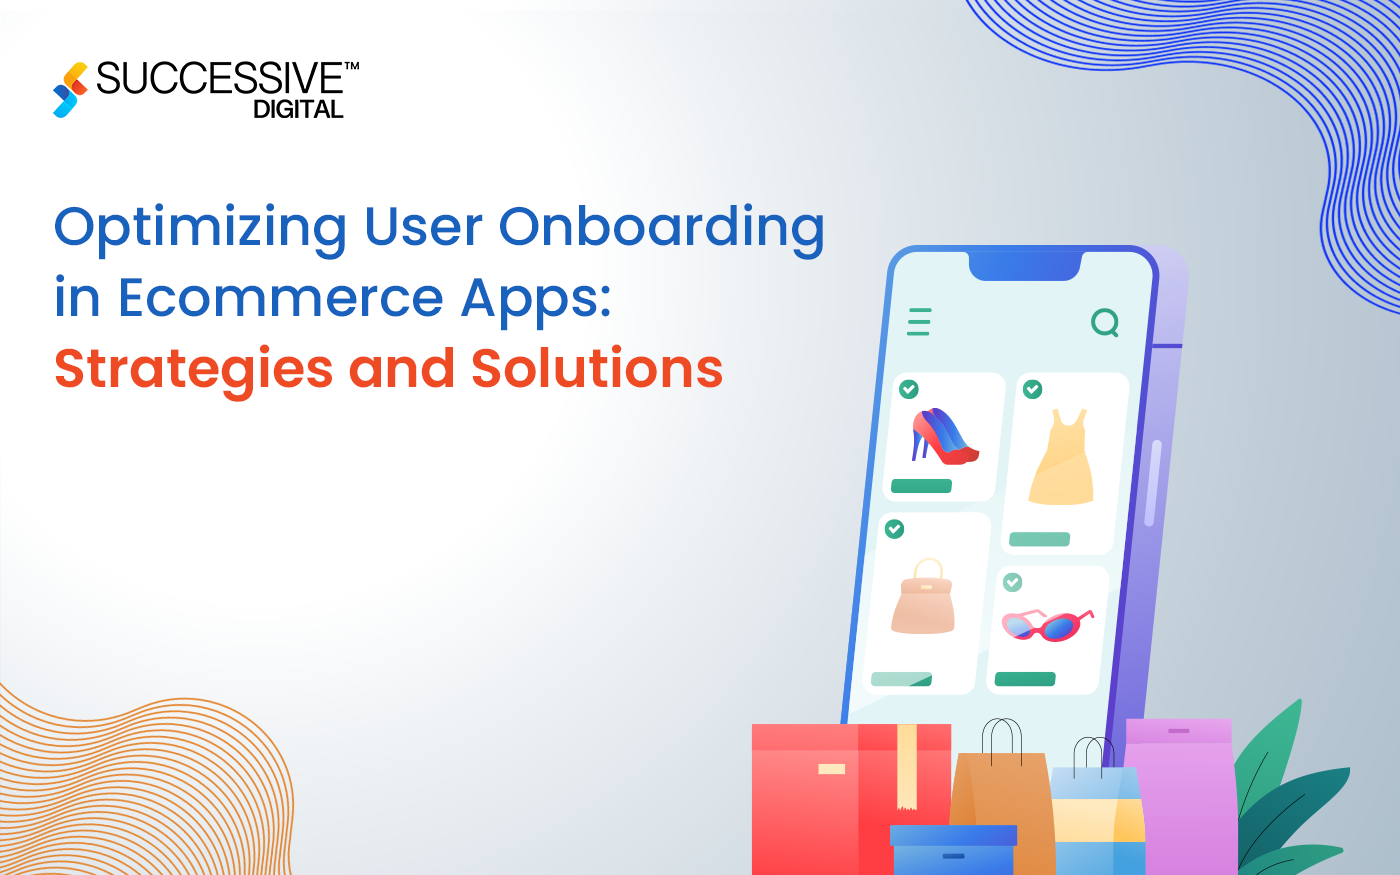 Optimizing User Onboarding in eCommerce Apps: Strategies and Solutions